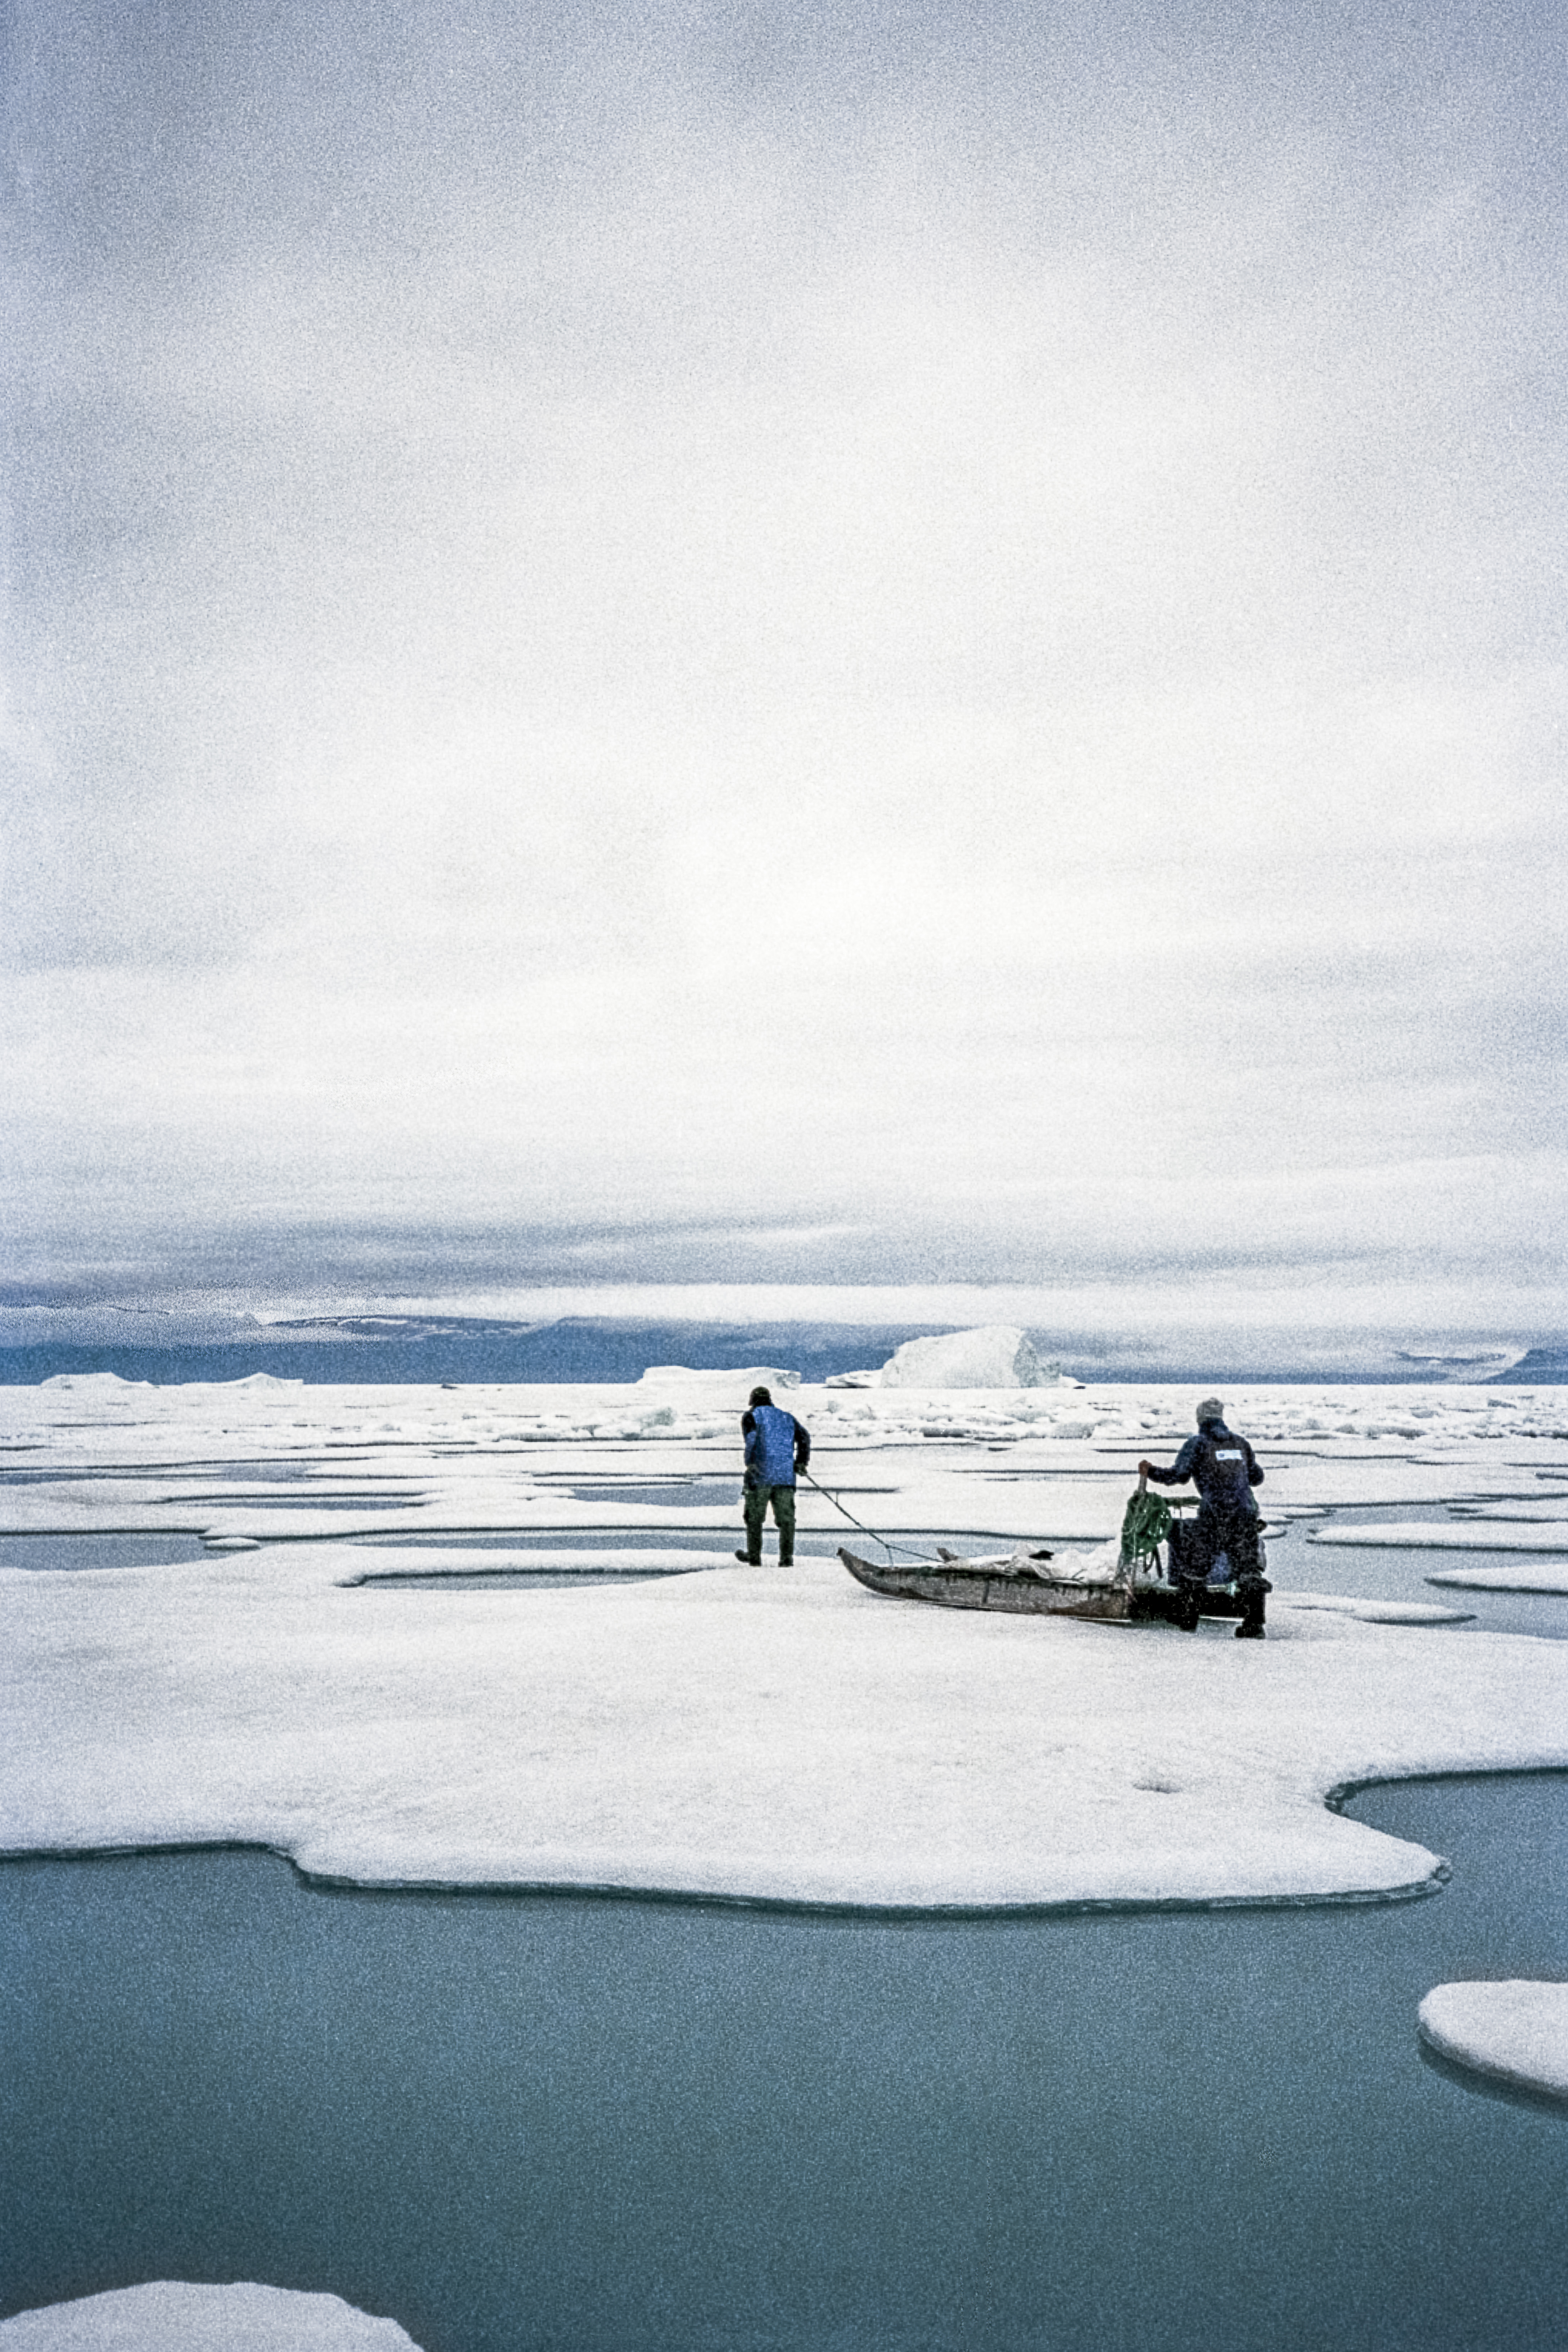 Inuuteq Storch - Two people standing on planks of ice with a camera on the sea